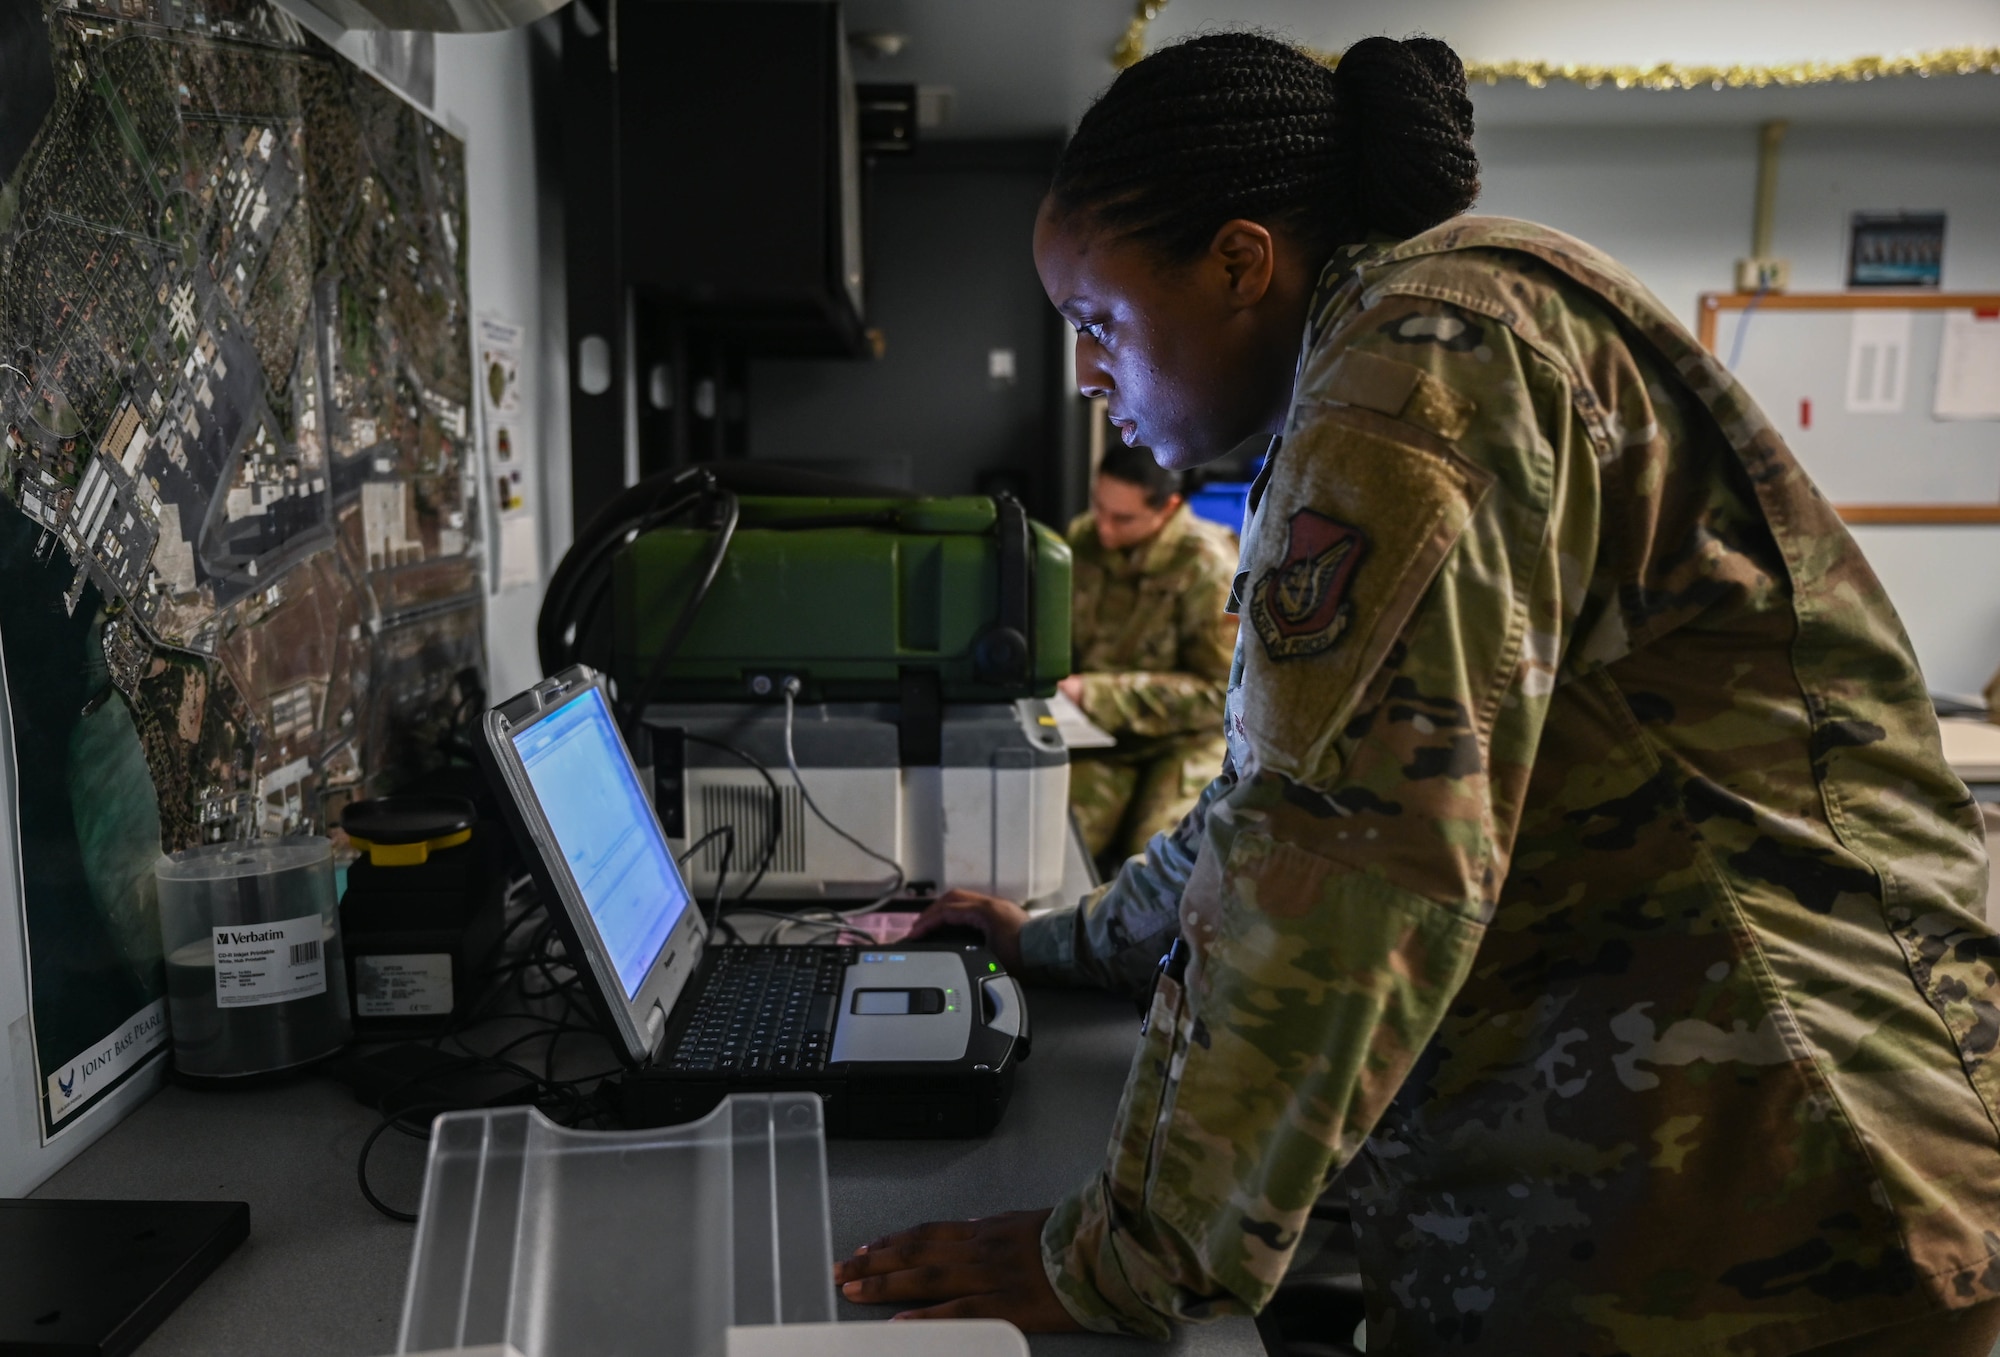 Senior Airman Christina Burks, 15th Operational Medical Readiness Squadron bioenvironmental engineering journeyman, reads water sampling results at the Bioenvironmental Flight laboratory at Joint Base Pearl Harbor-Hickam, Hawaii, Dec. 10, 2021. The chromatograph mass spectrometer is utilized to detect volatile organic compounds in water samples. If VOC is detected, the flight will coordinate rigorous testing with Navy personnel. (U.S. Air Force photo by Staff Sgt. Alan Ricker)